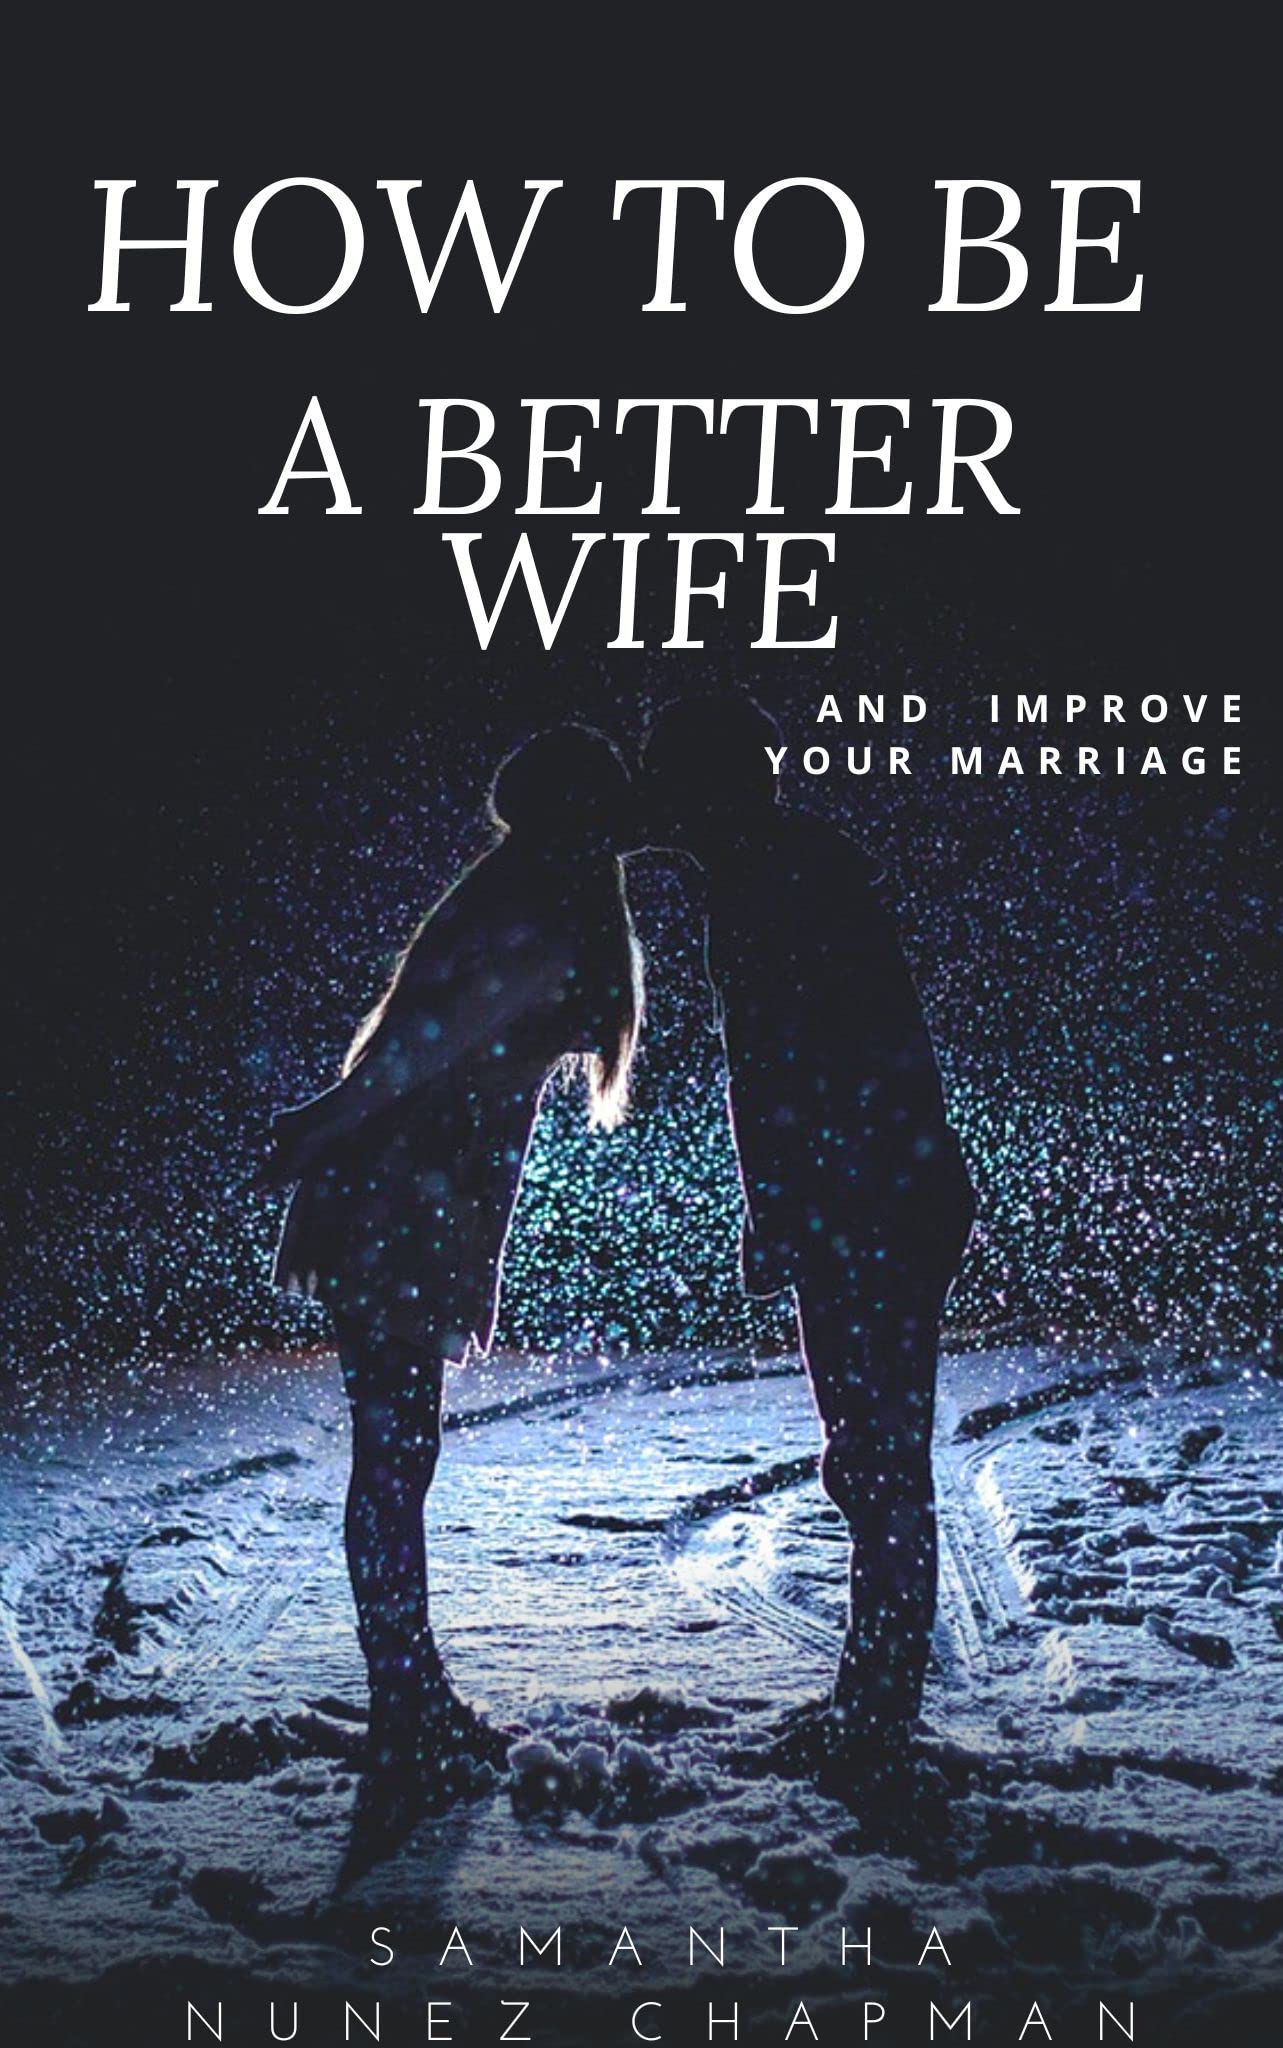 How To Be A Better Wife : And Improve Your Marriage. Secrets To Becoming A Good Wife To Your Husband And Improving Your Home For A Lasting Marriage (Intimate Ties Book 1)